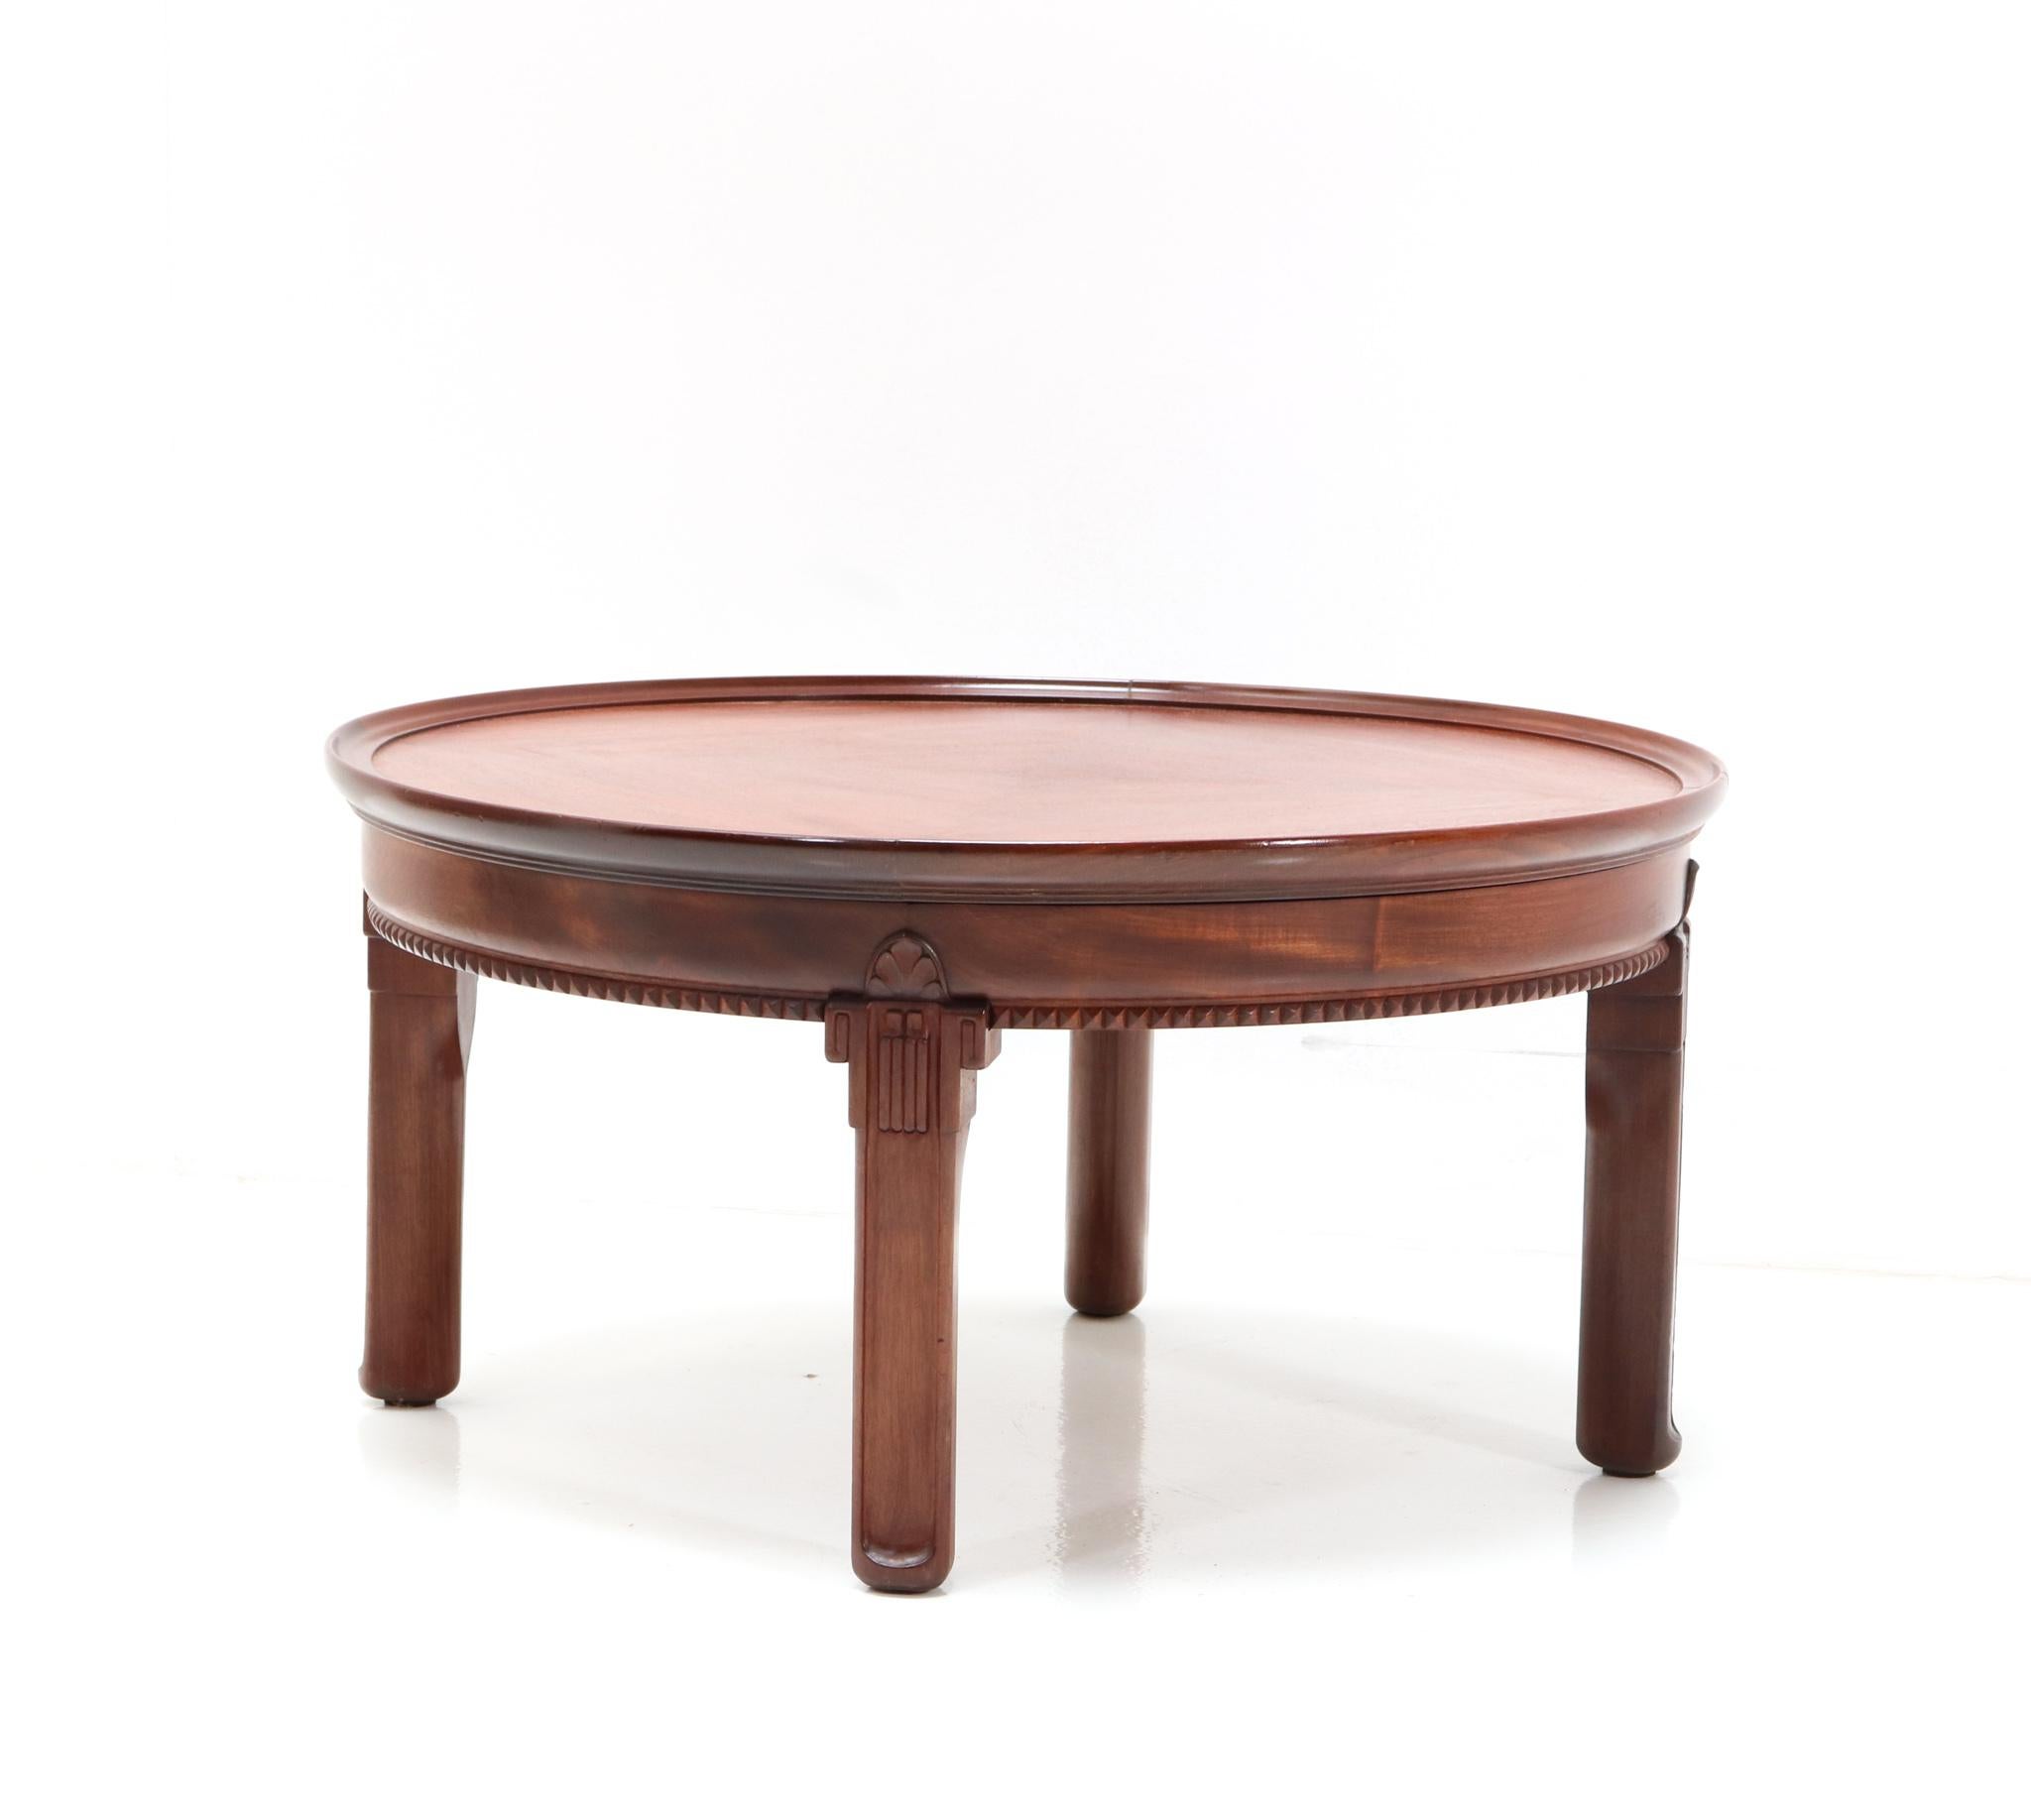 Magnificent and rare Art Deco Amsterdamse School coffee table.
Striking Dutch design from the 1920s.
Solid walnut base with original walnut veneered top.
This wonderful Art Deco Amsterdamse School coffee table is in very good refinished condition